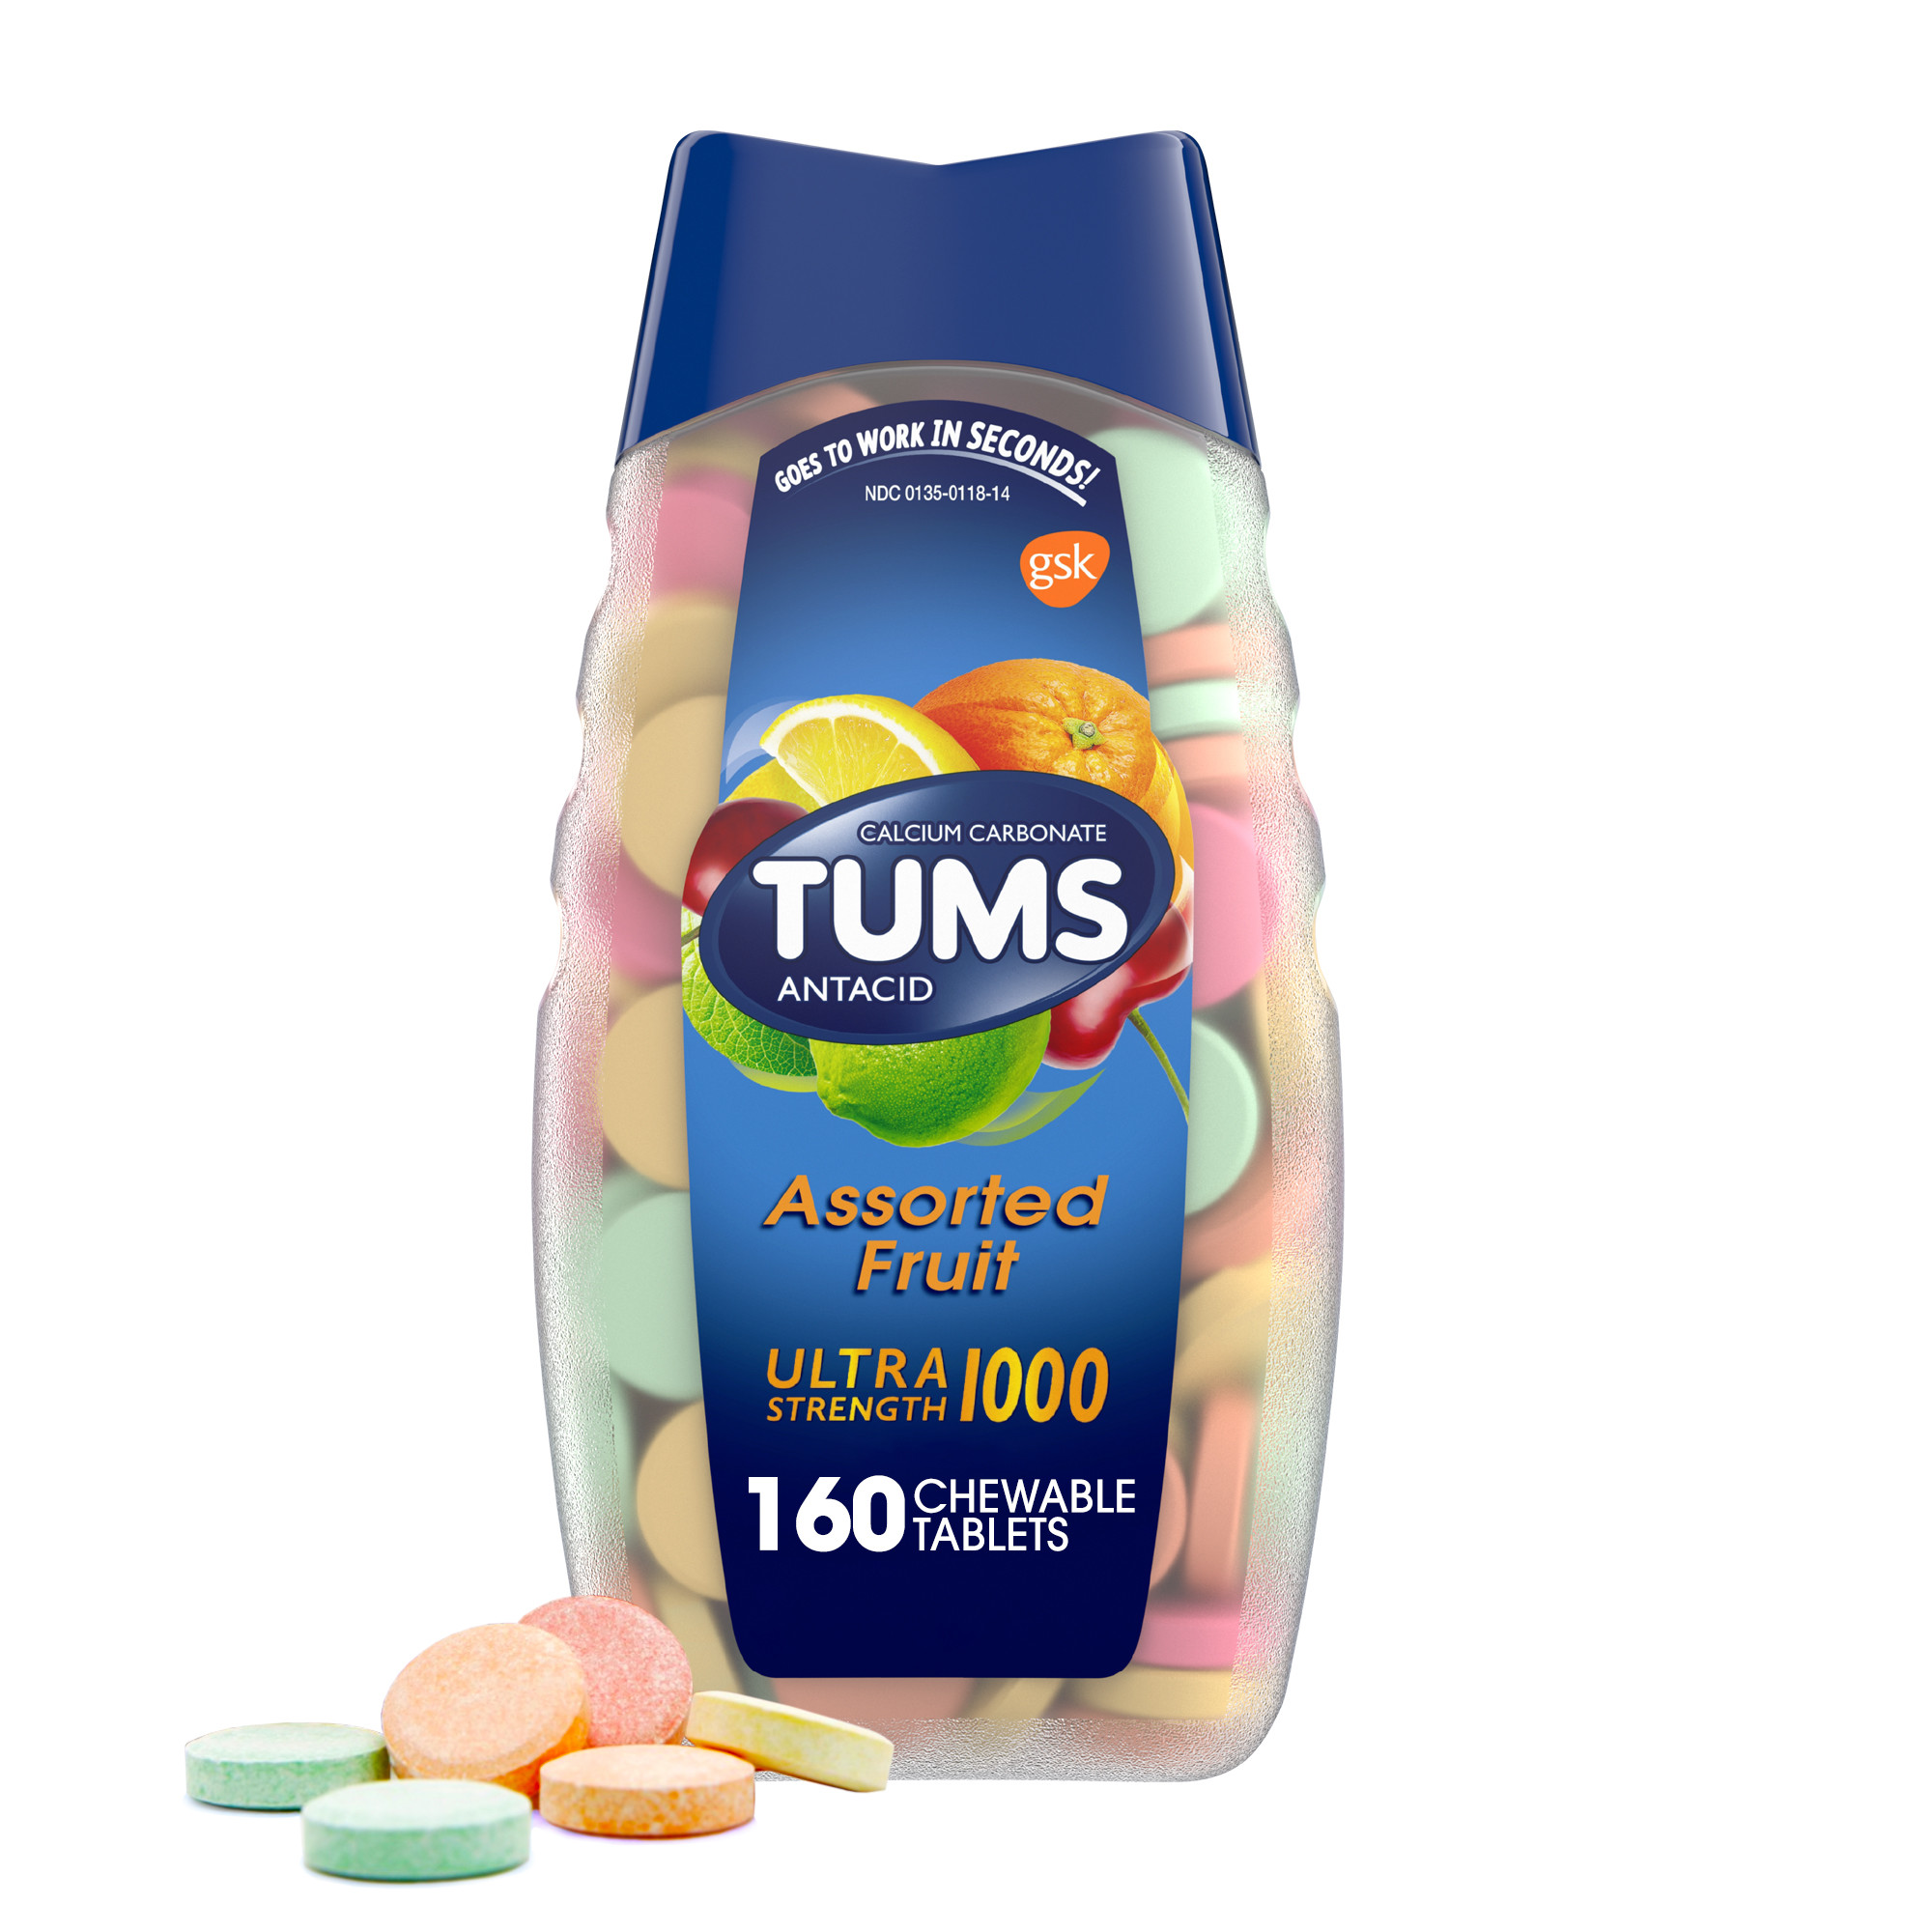 TUMS Ultra Strength Heartburn Relief Chewable Antacid Tablets, Fruit, 160 Count - image 2 of 13